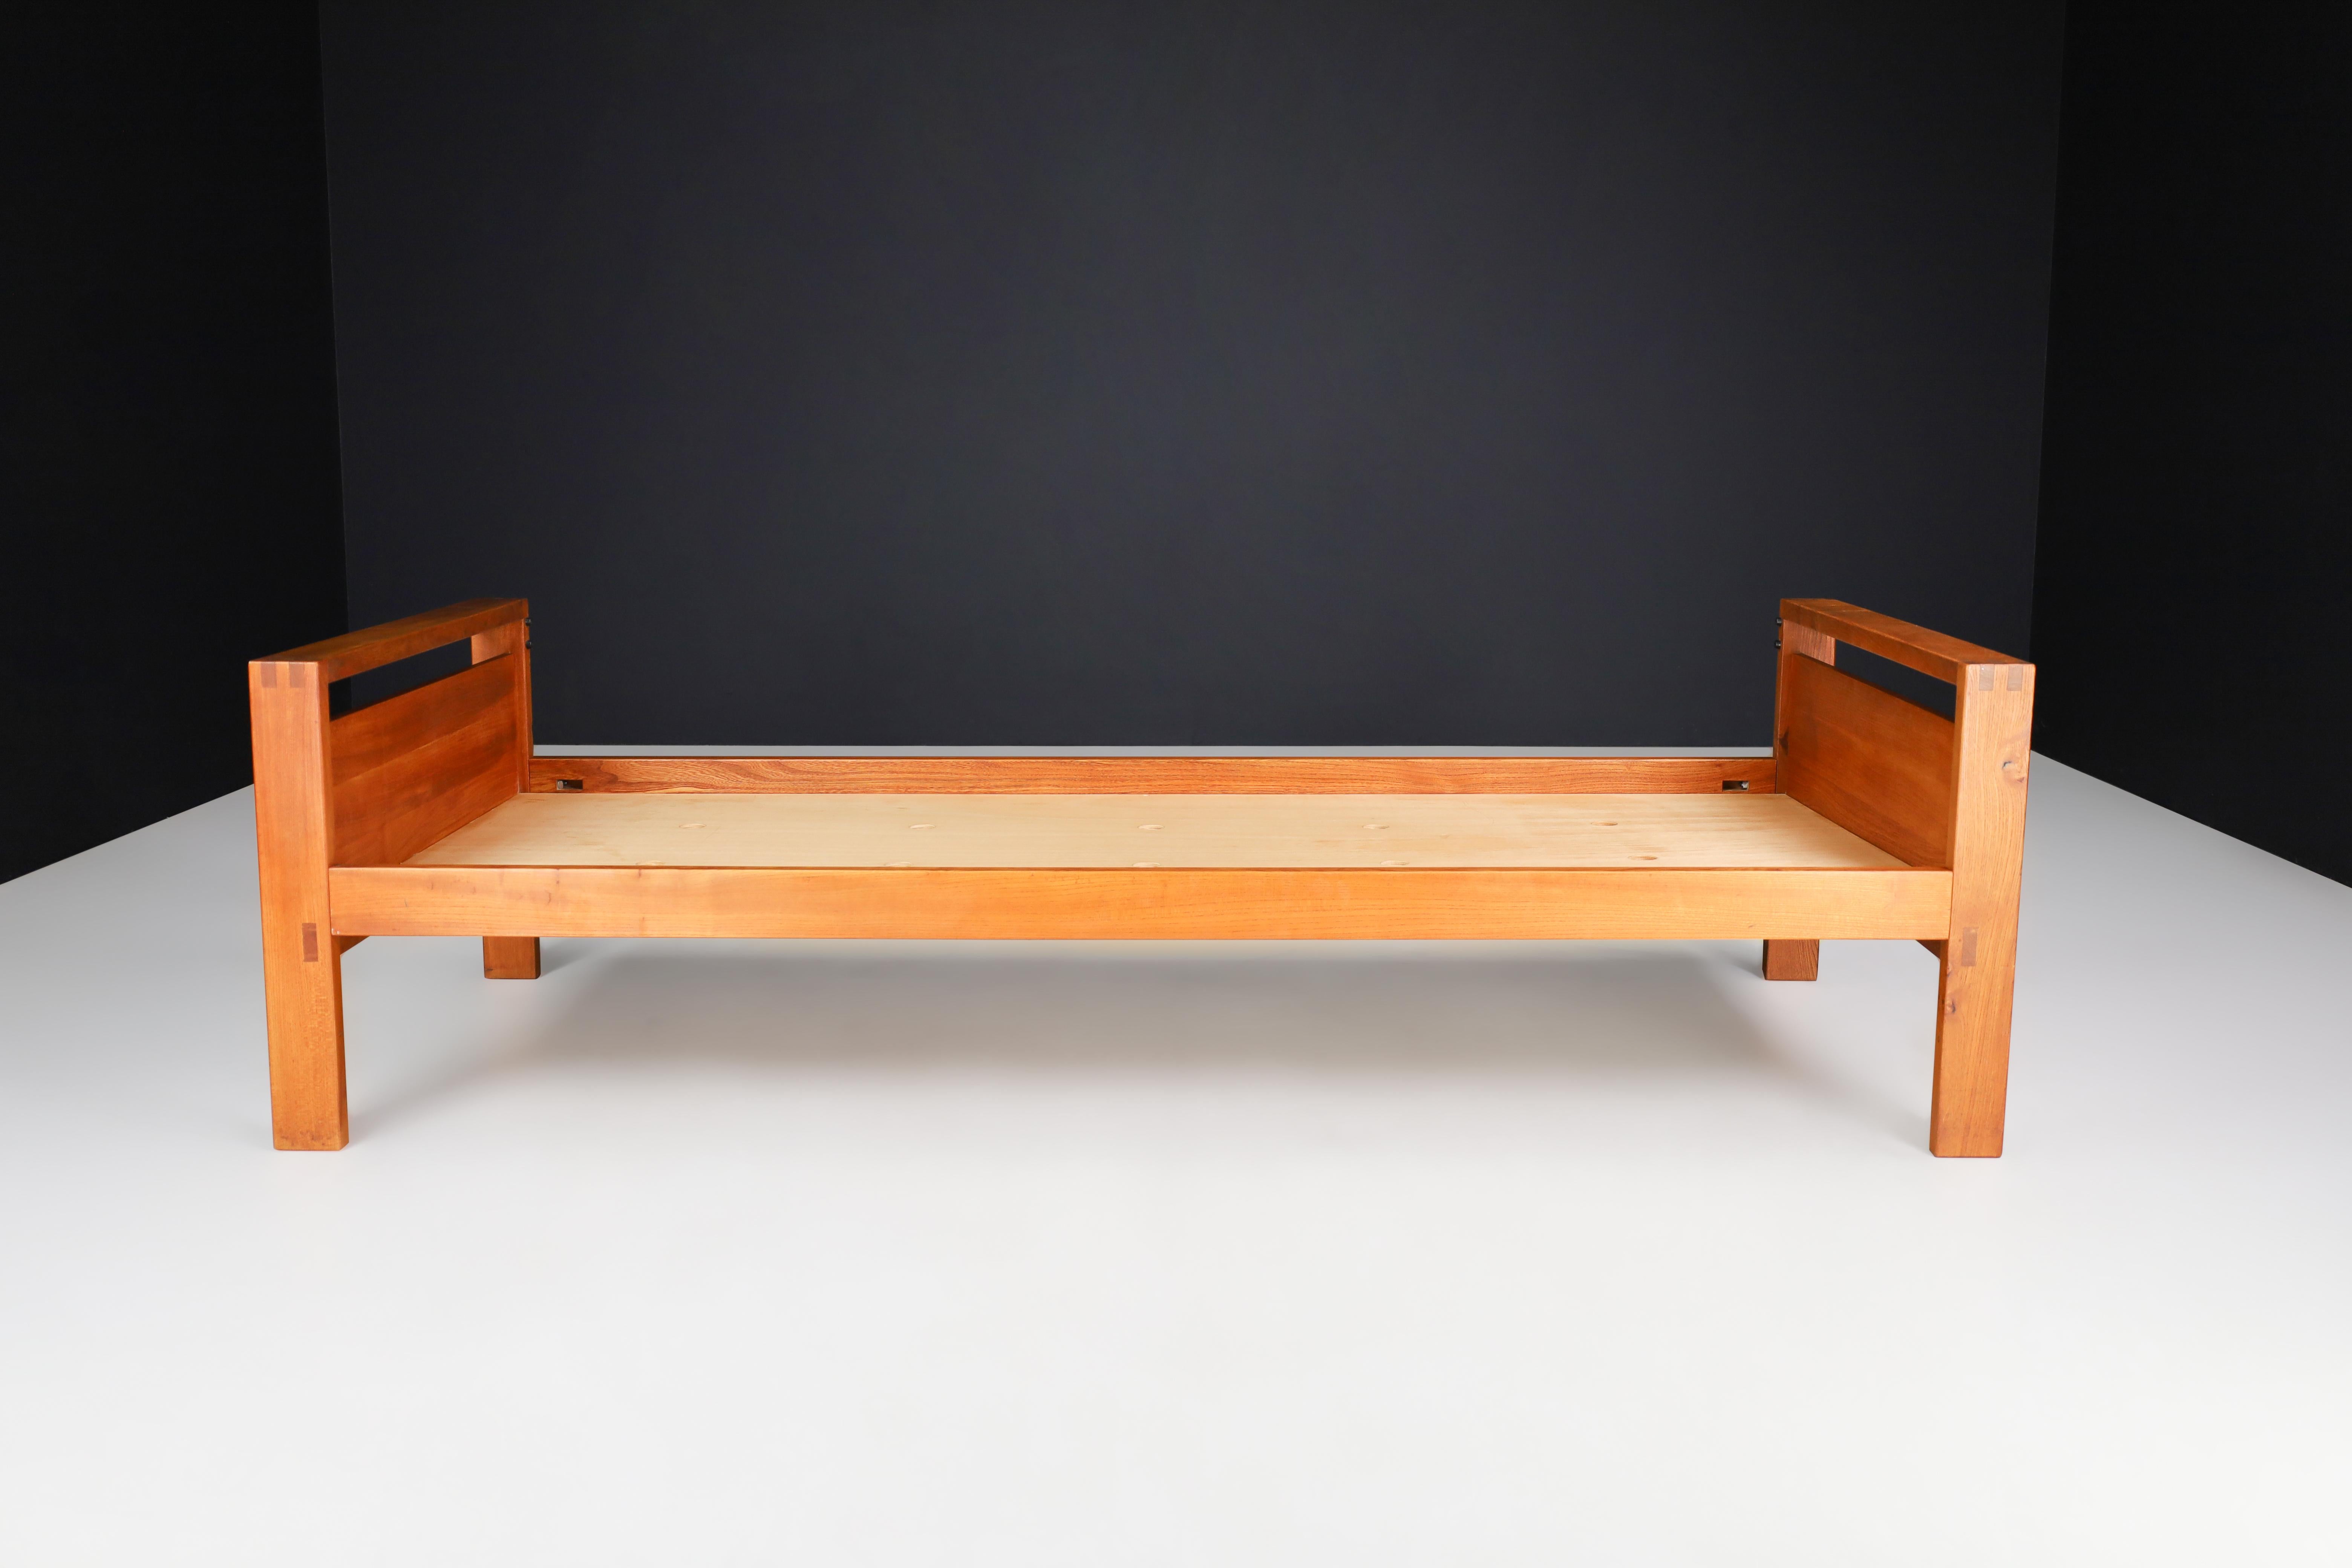 Midcentury Pierre Chapo Lo6a Bed, Daybed in Solid Elm Wood, France, 1960s In Good Condition For Sale In Almelo, NL